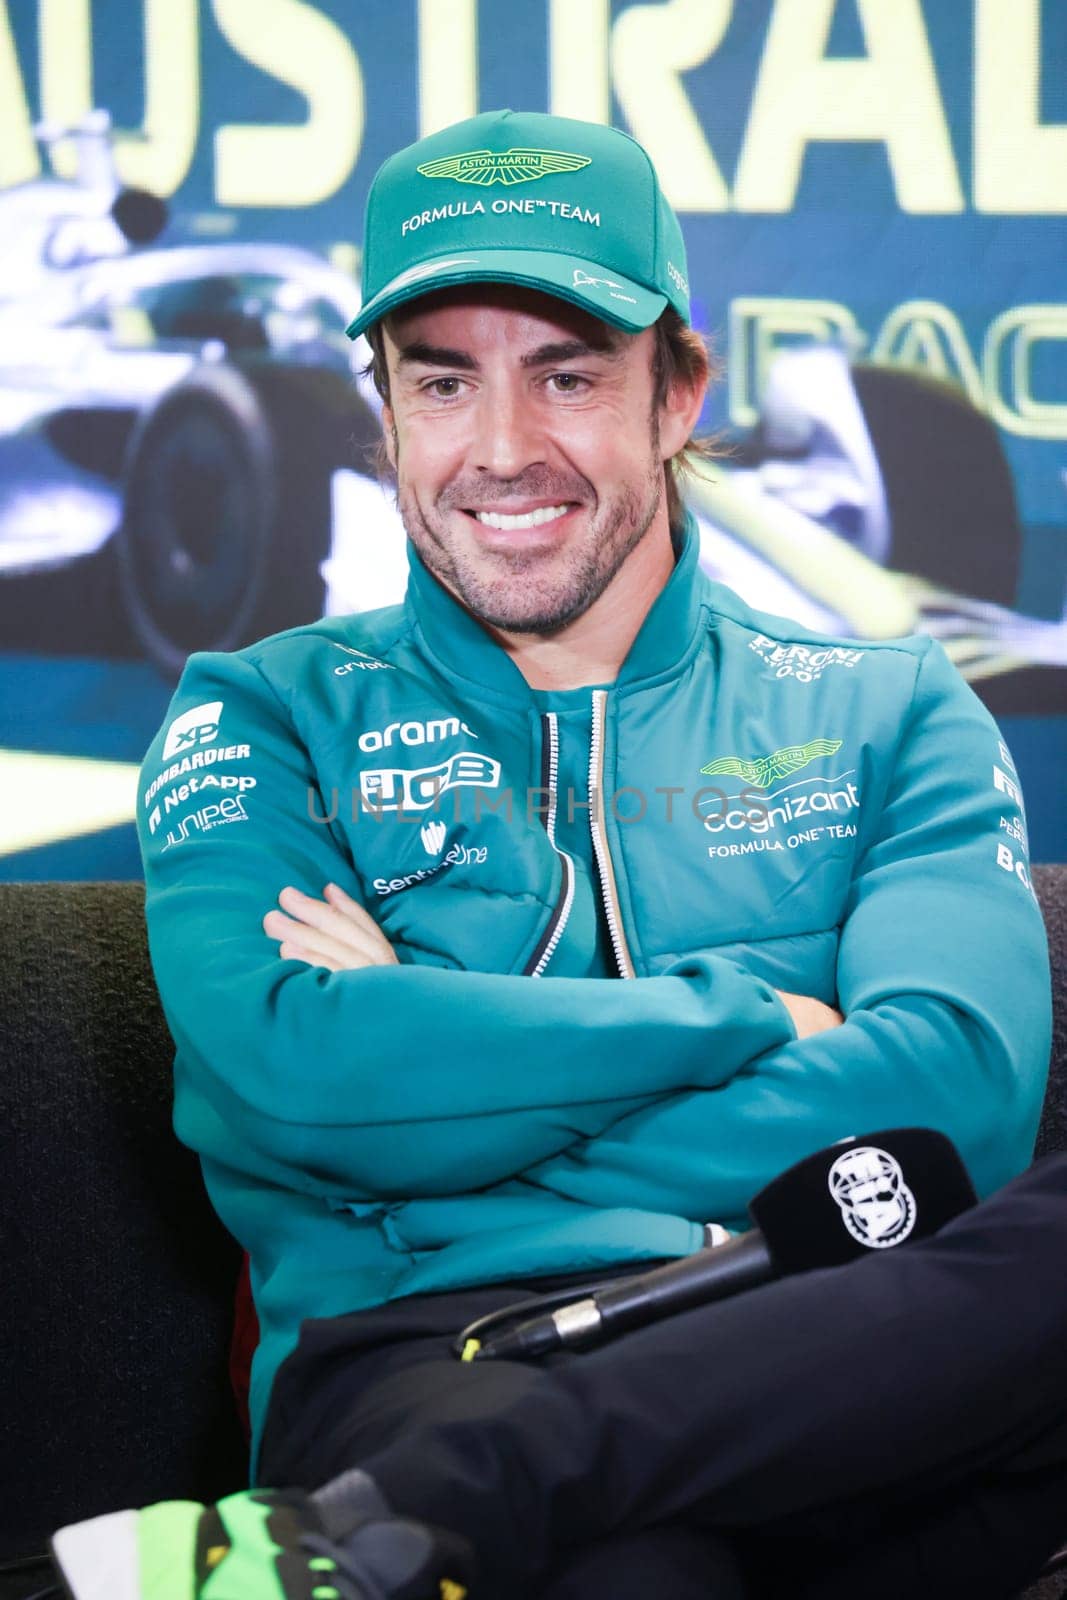 MELBOURNE, AUSTRALIA - MARCH 30: Fernando Alonso of Spain during a press conference at the 2023 Australian Formula 1 Grand Prix on 30th March 2023